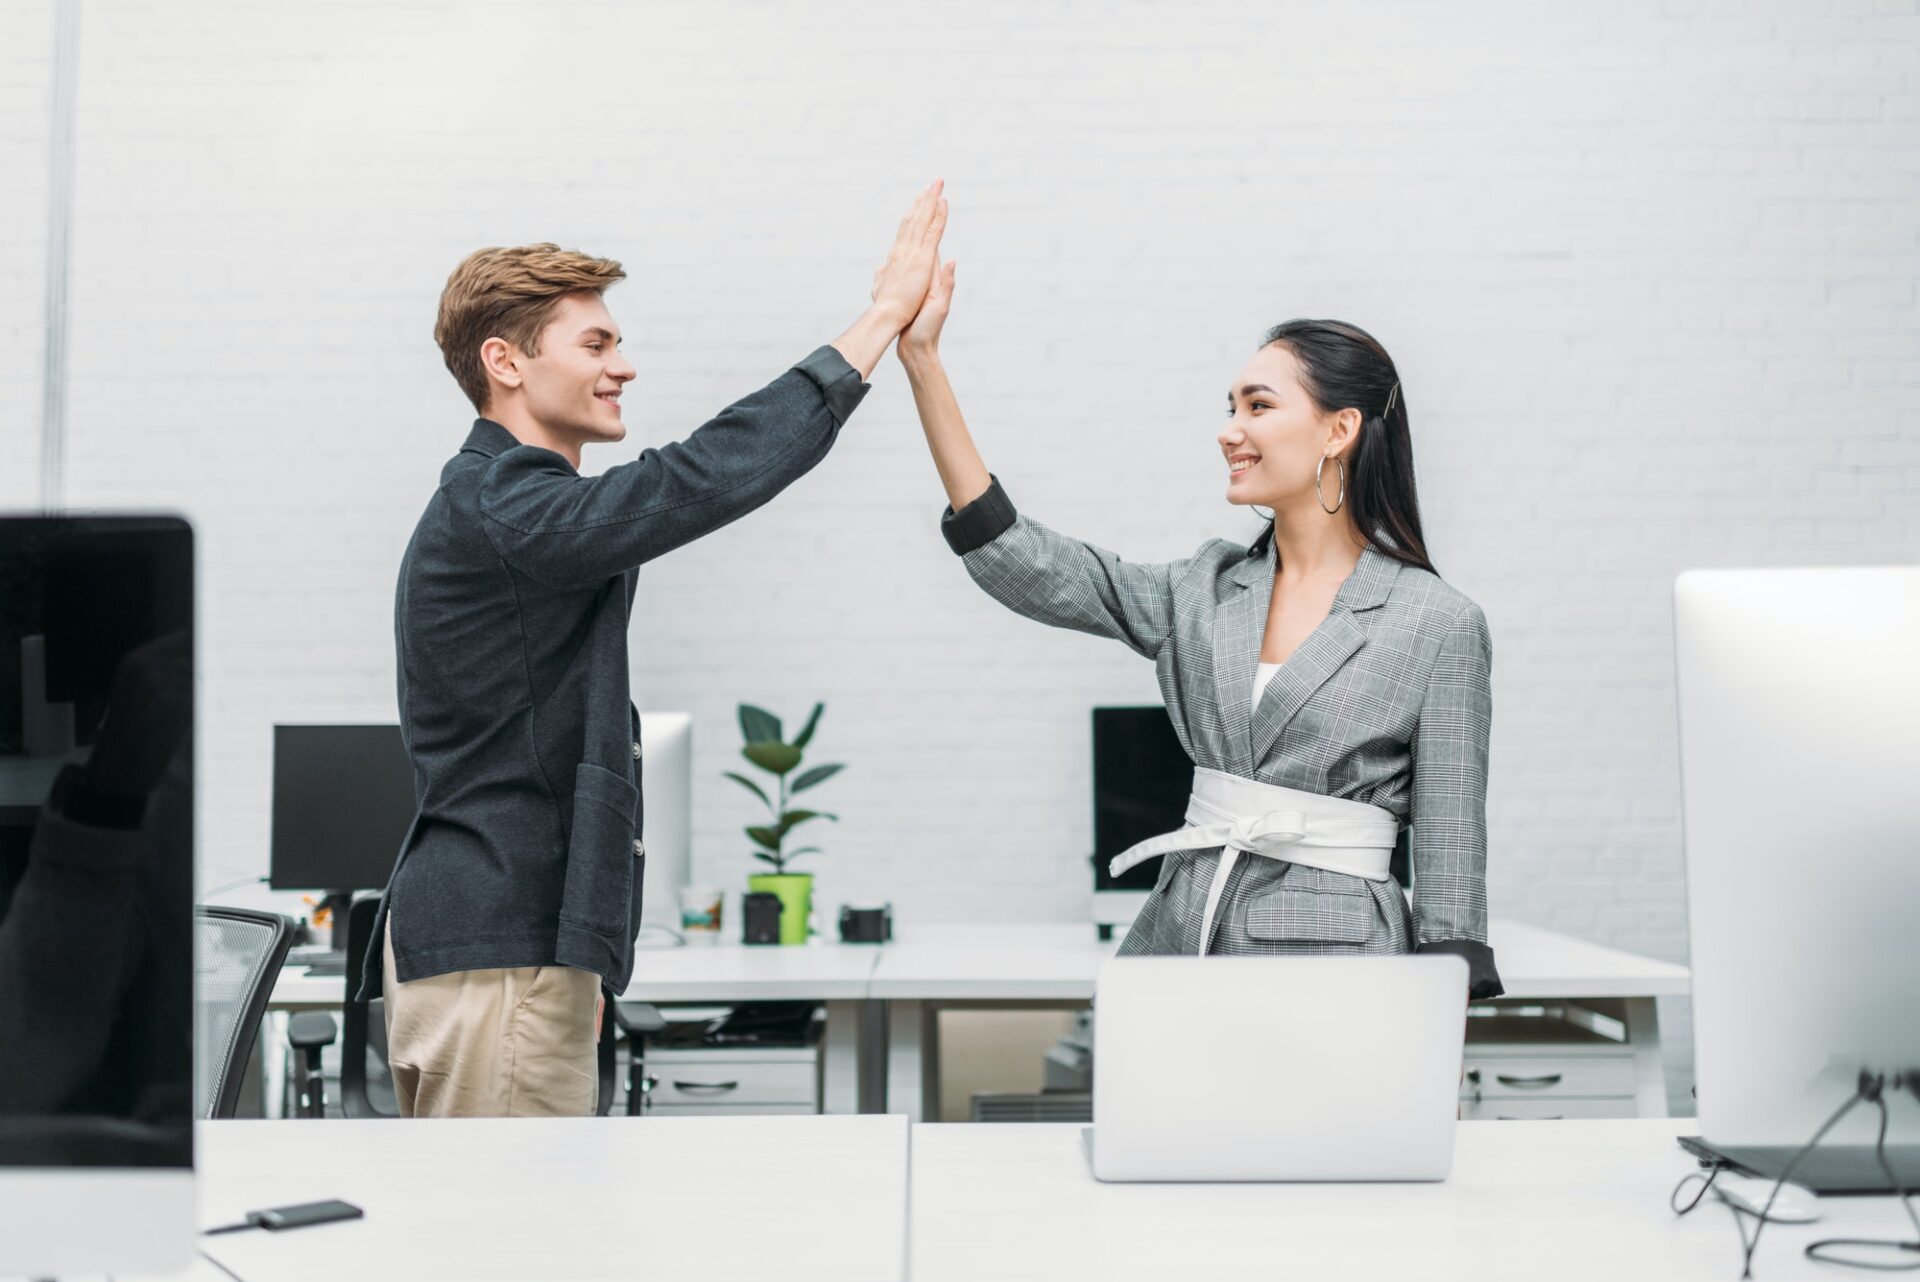 multiethnic business partners giving high five at office